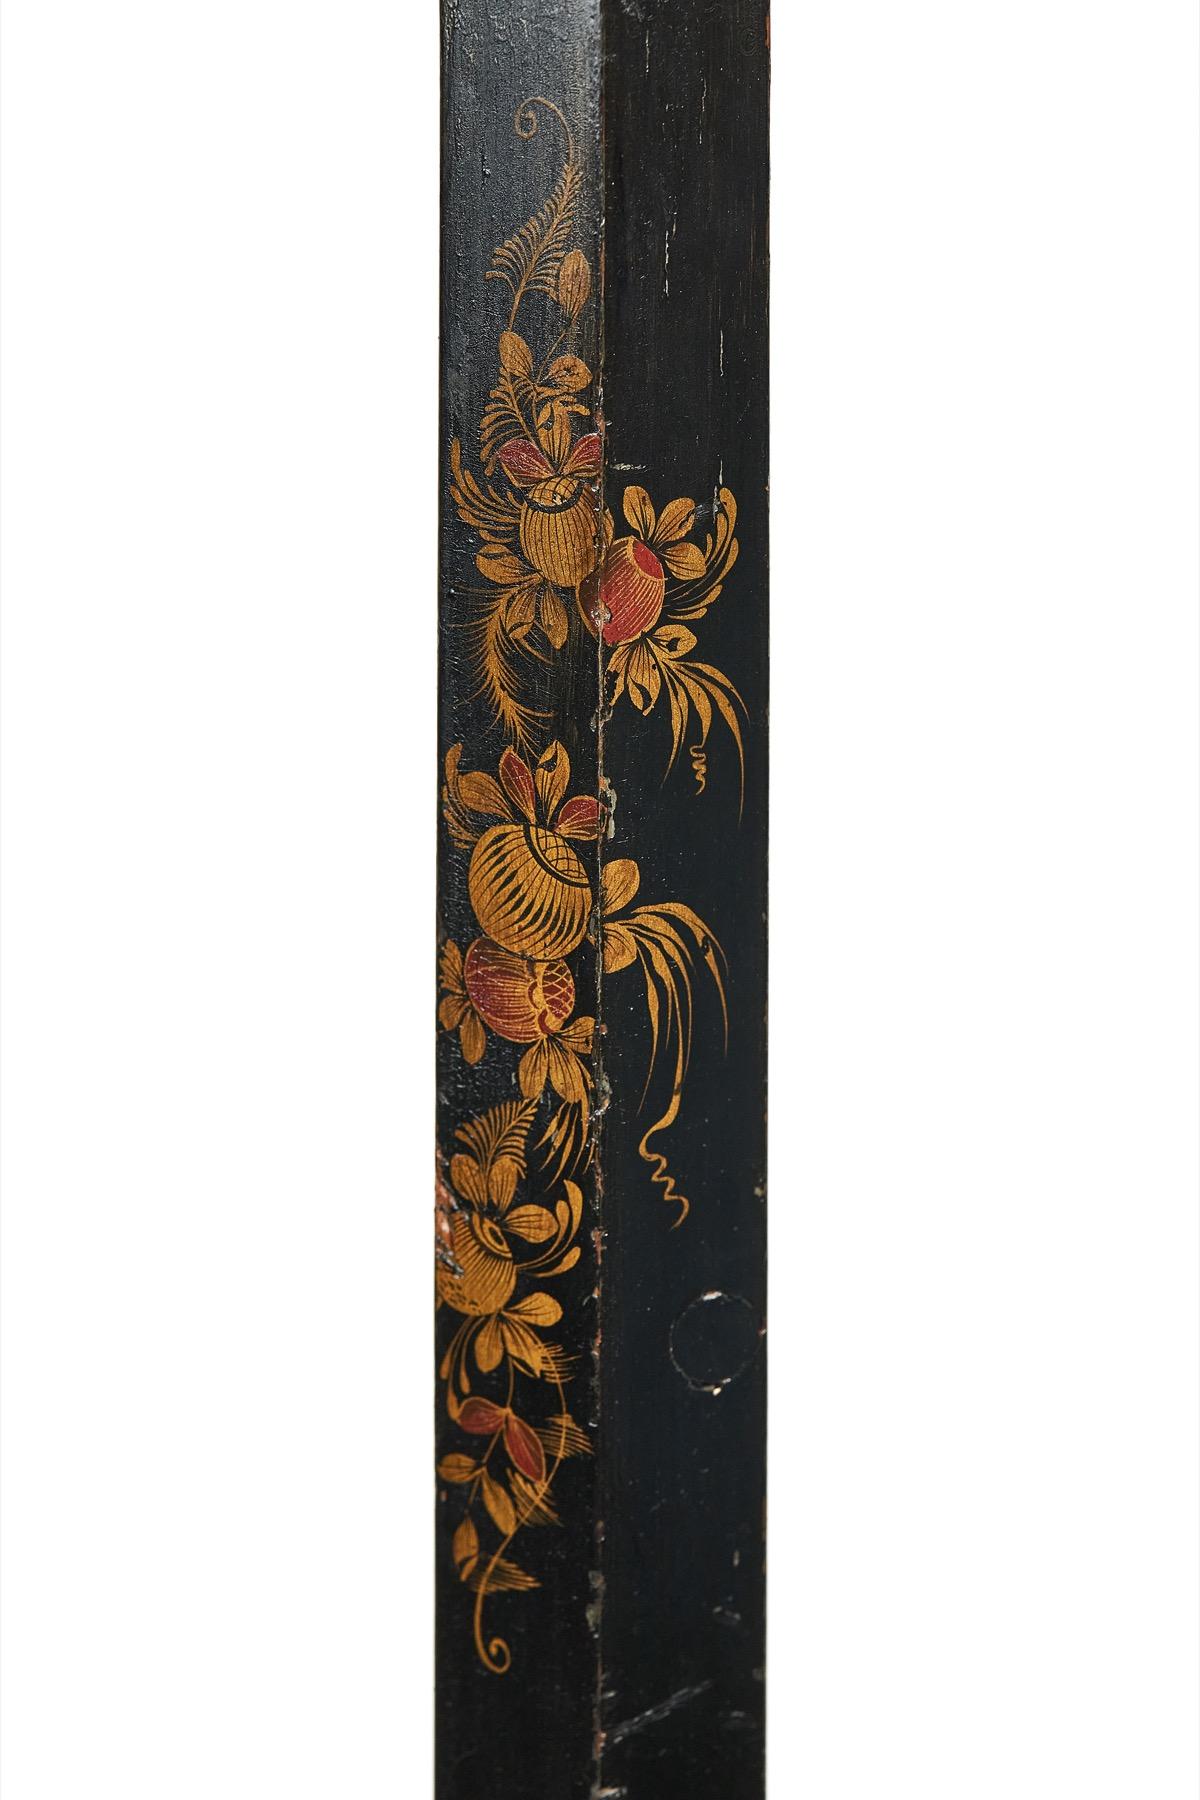 Lacquer Chinoiserie Decorated Standard Lamp circa 1930s [B] For Sale